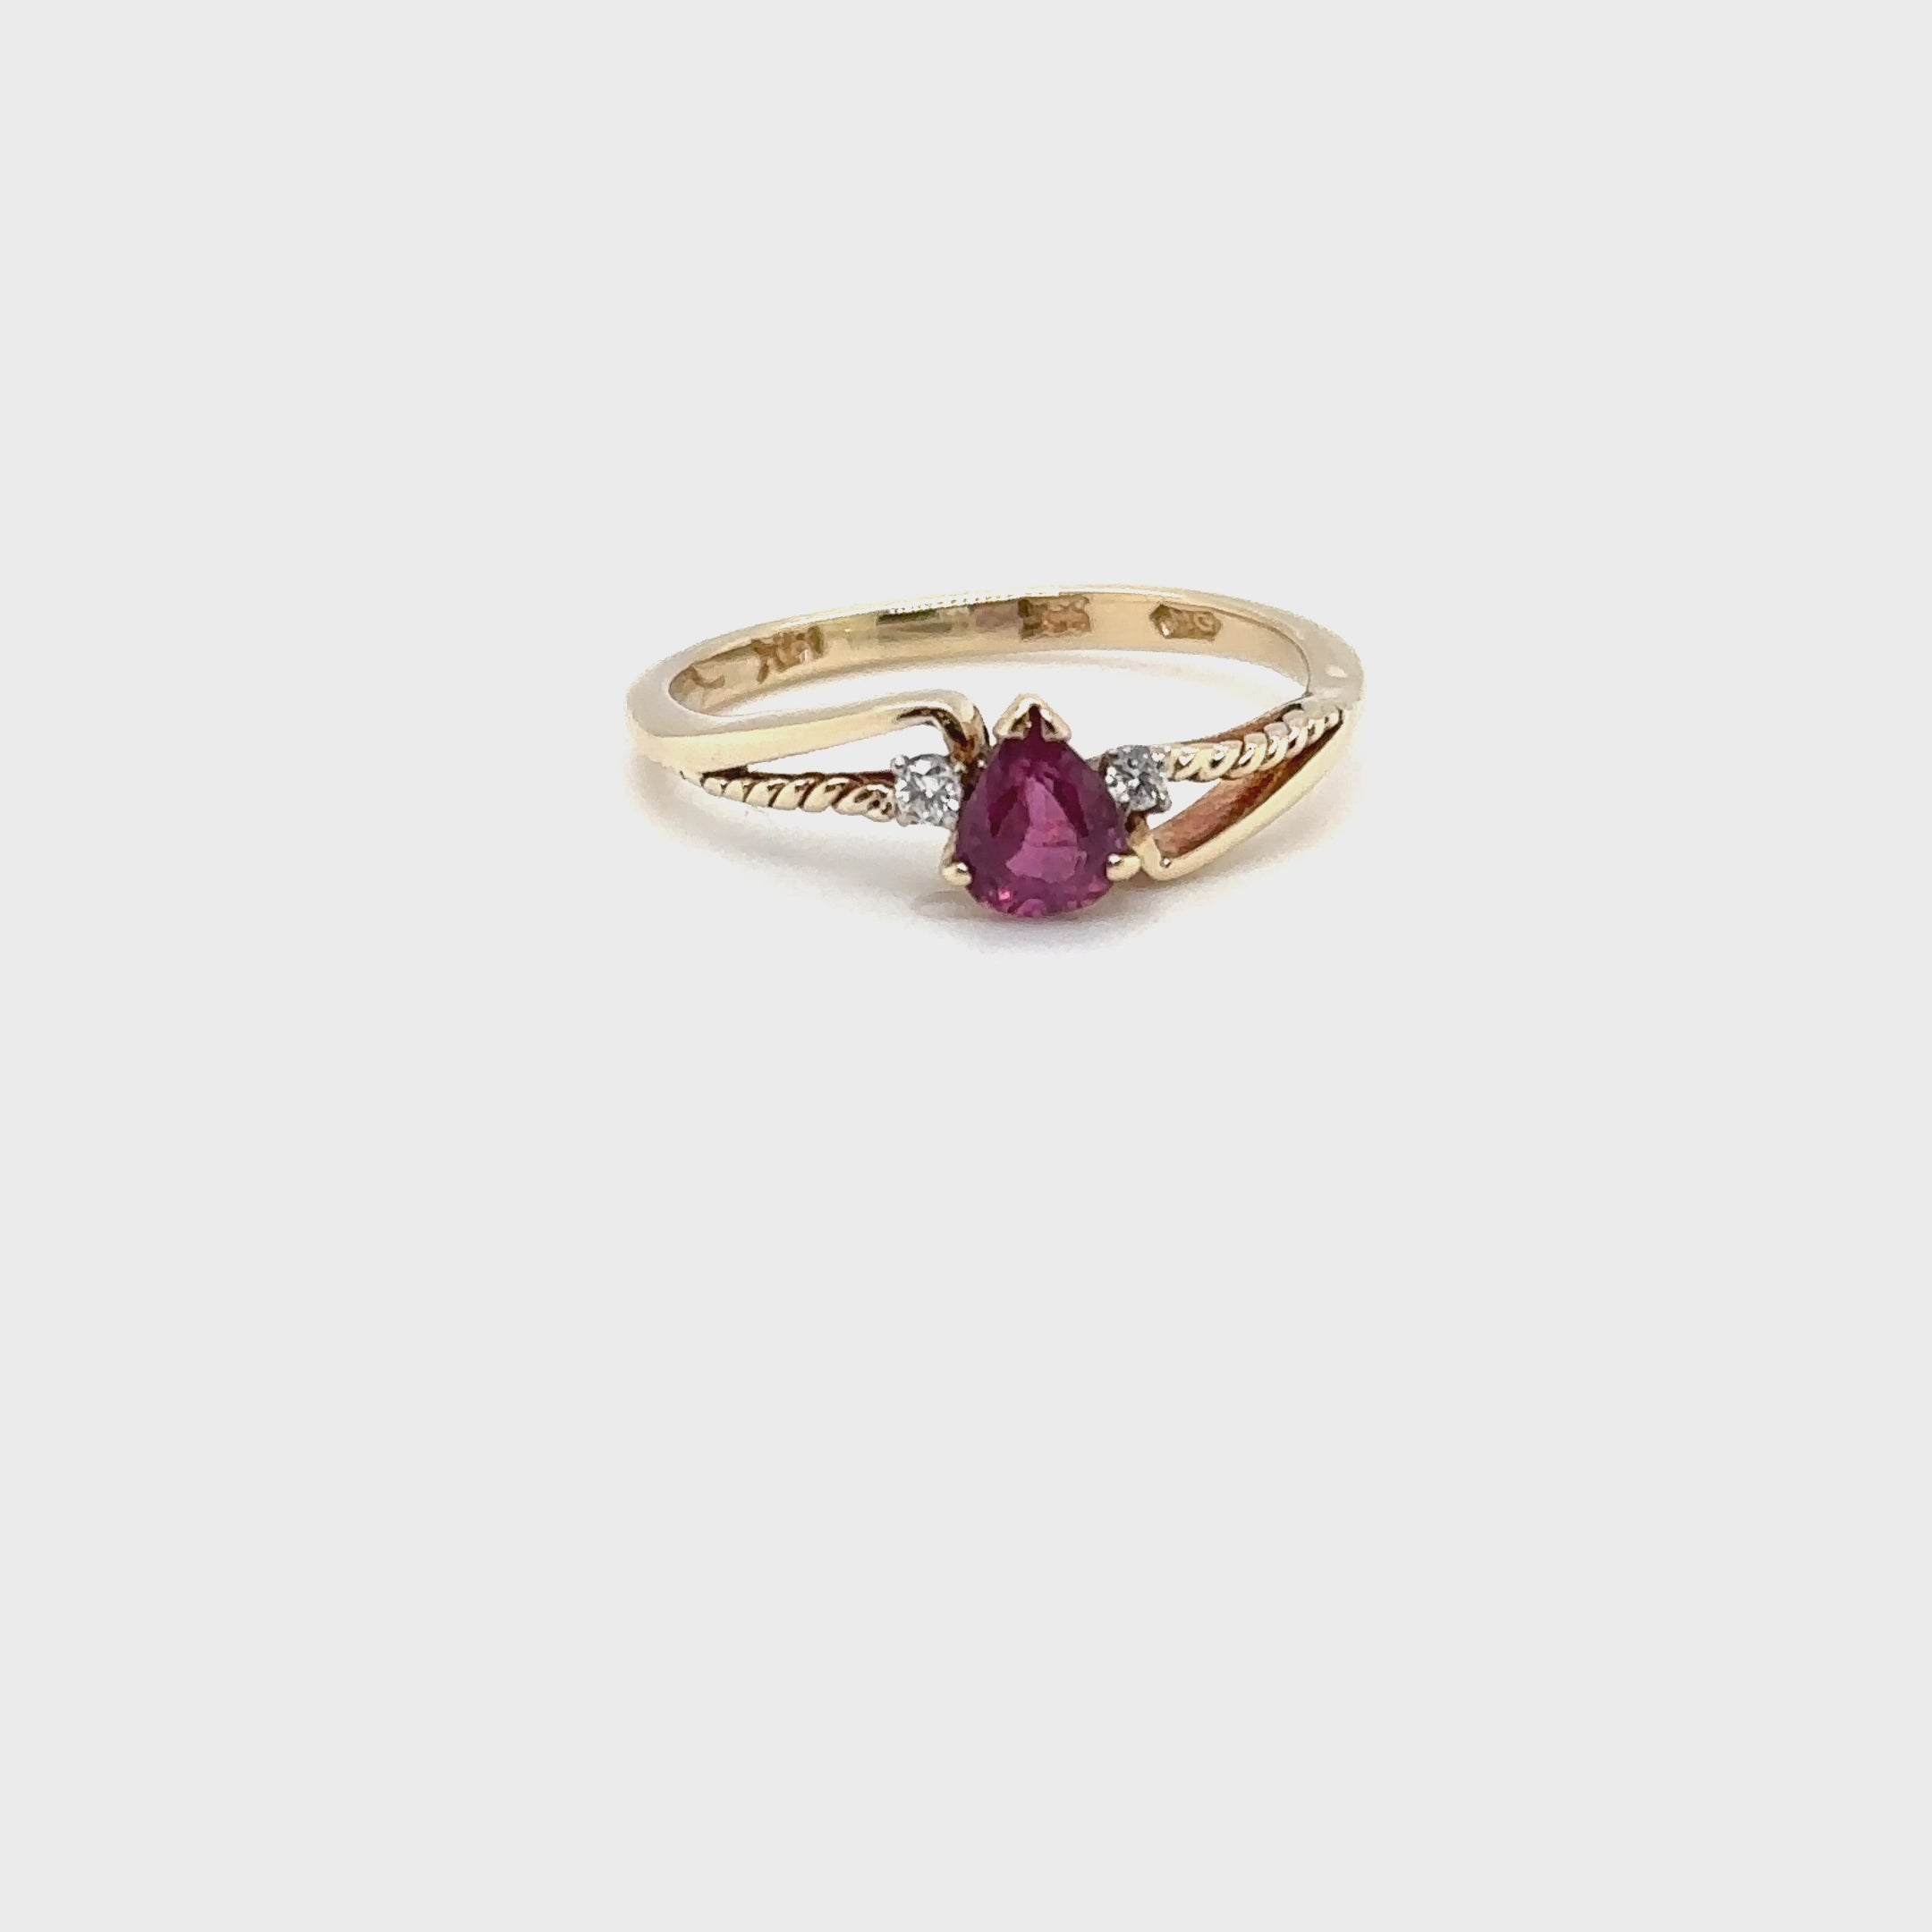 Natural Ruby & Diamond Ring 14K Solid Gold .46tcw Bridal Wedding Engagement Birthstone Statement Cocktail Estate Vintage Jewelry Jewellery